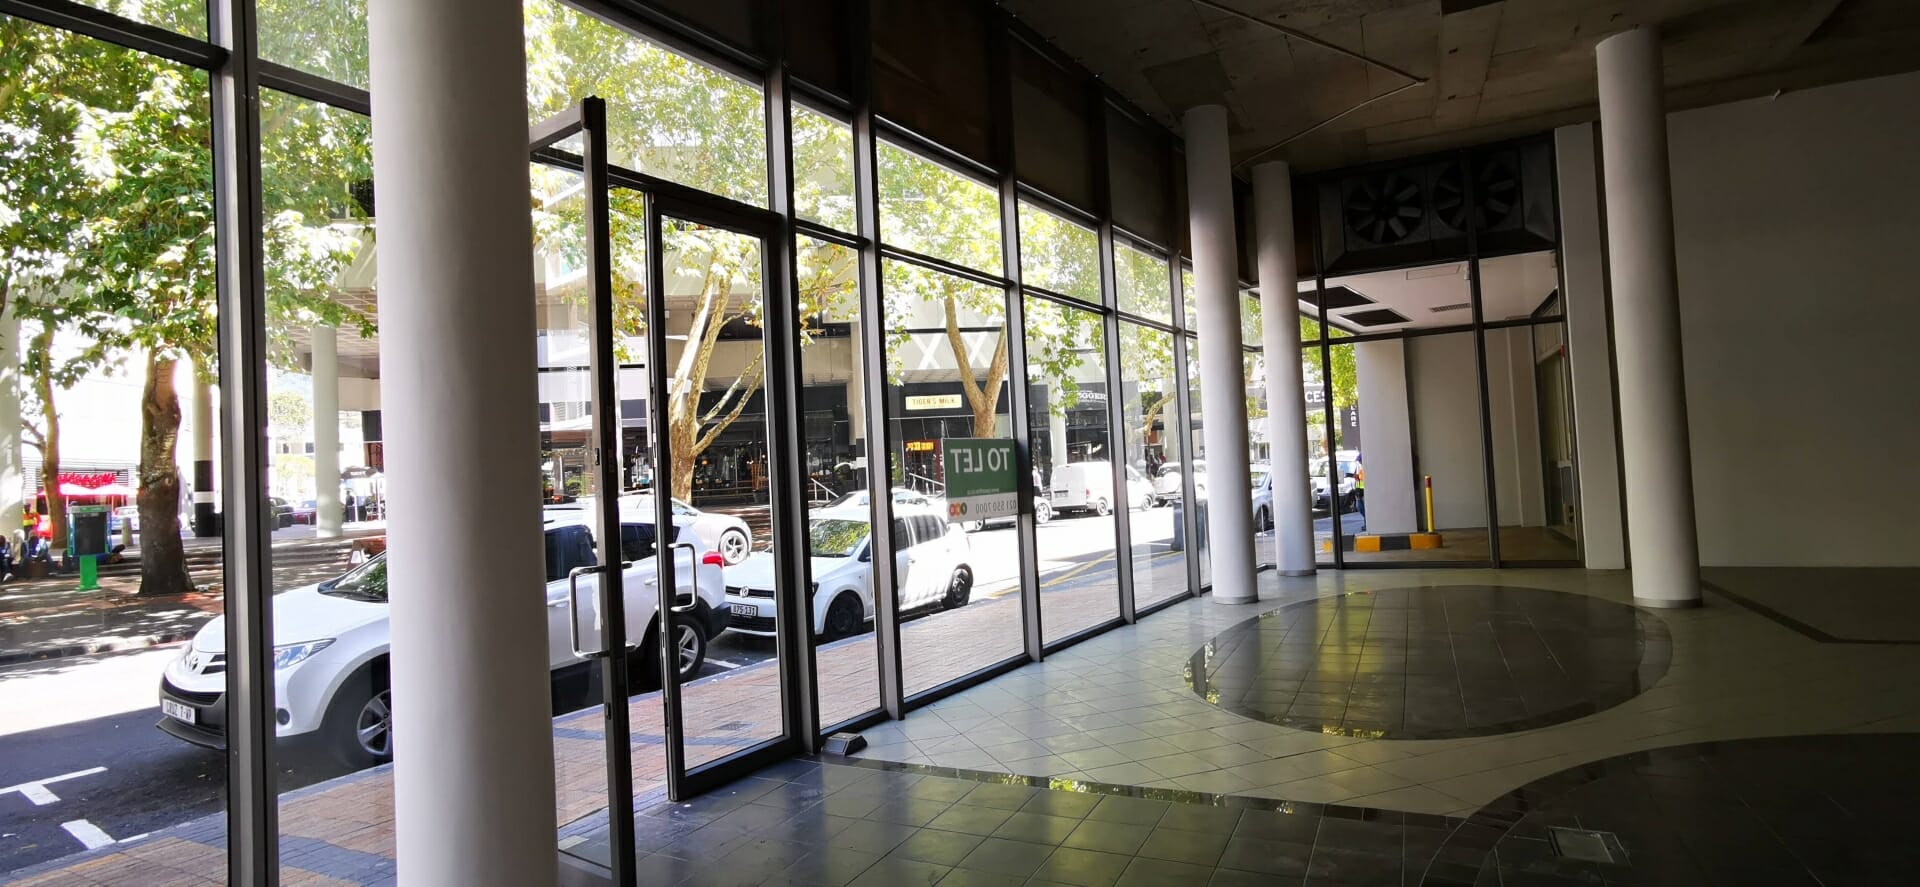 1,054m² –  Prime retail location in the heart of Claremont.